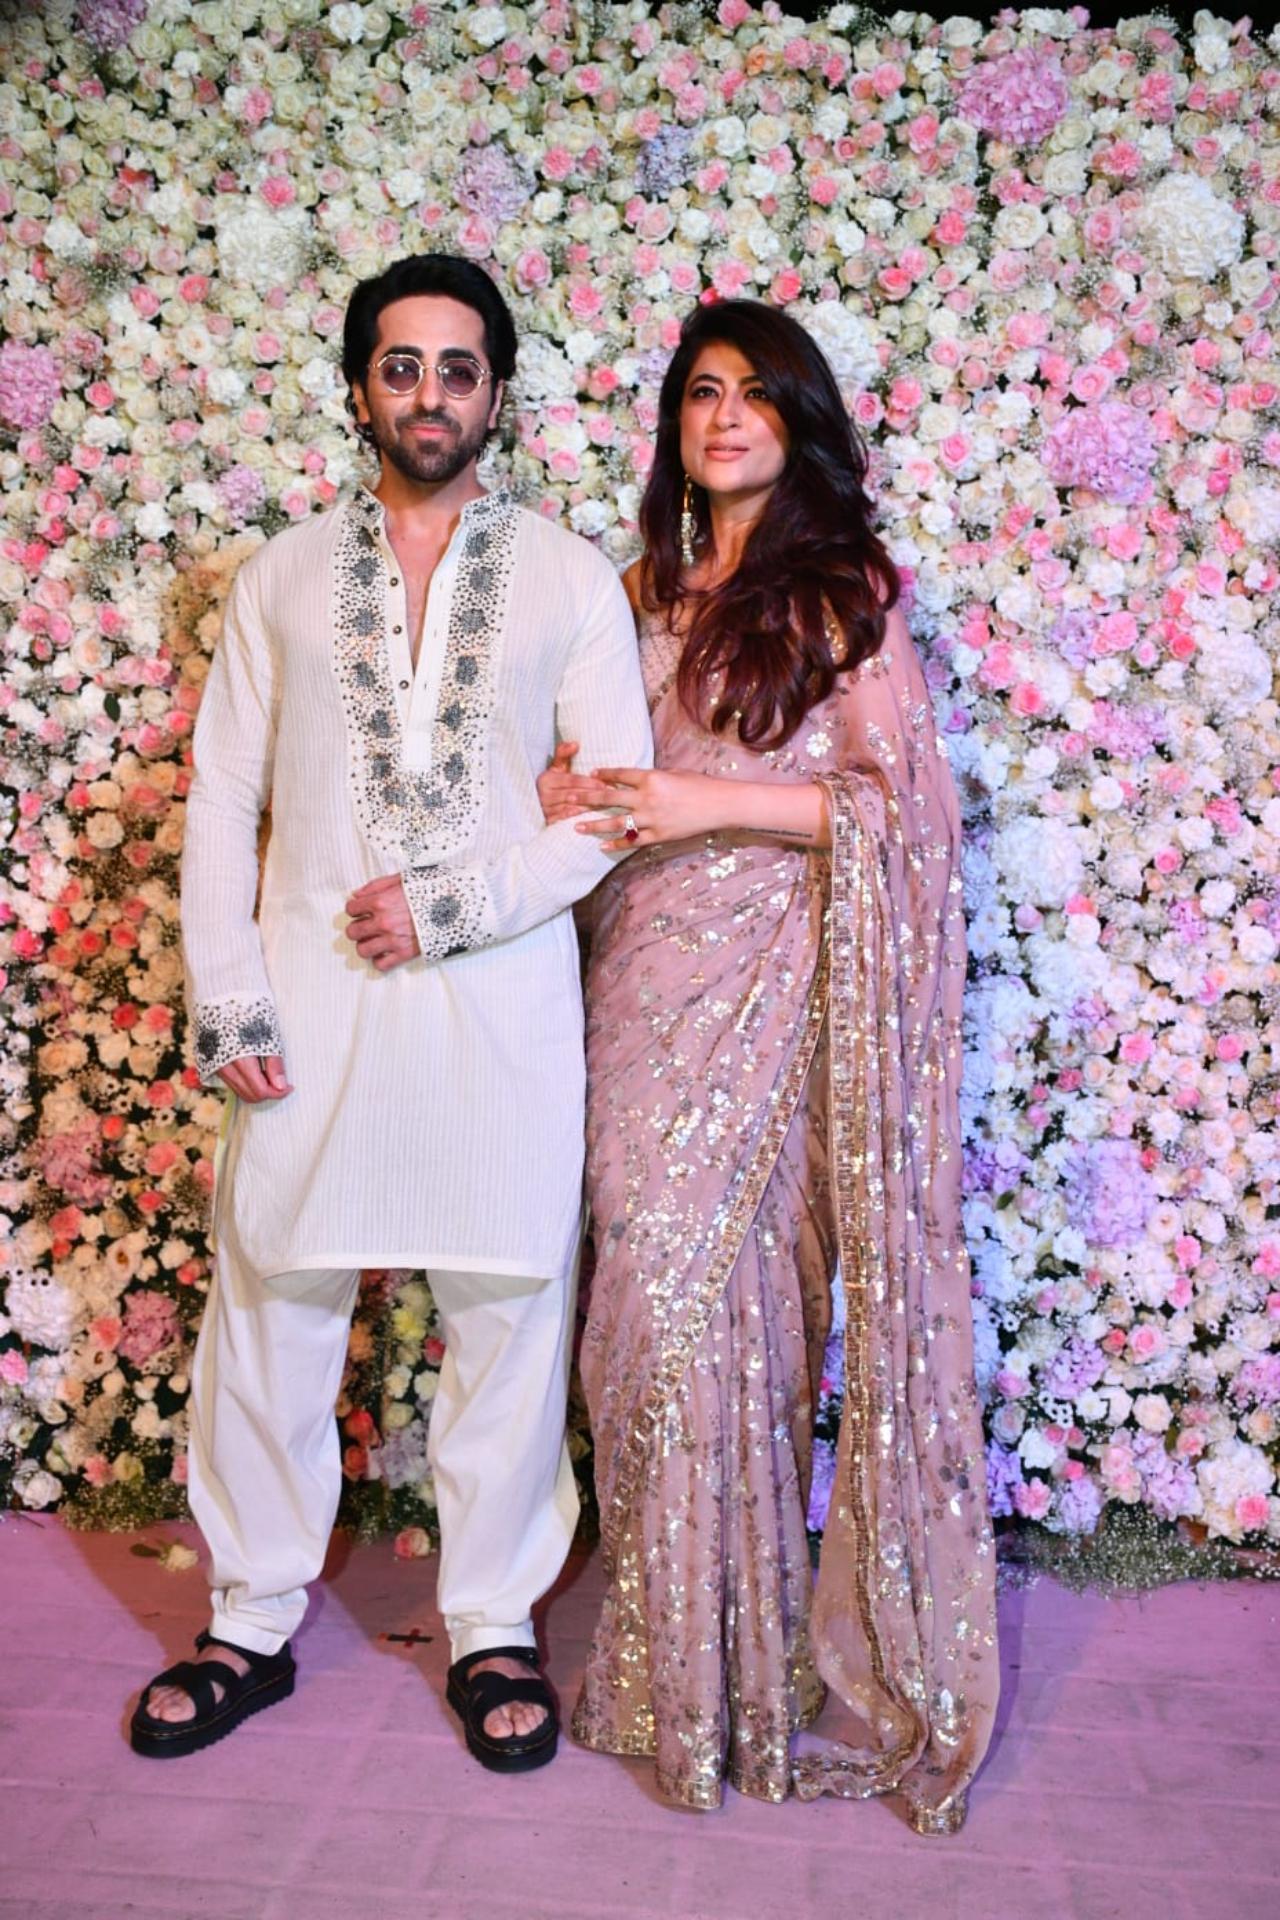 Ayushmann Khurrana and Tahira Kashyap Khurrana looked regal in their outfits for the Eid bash